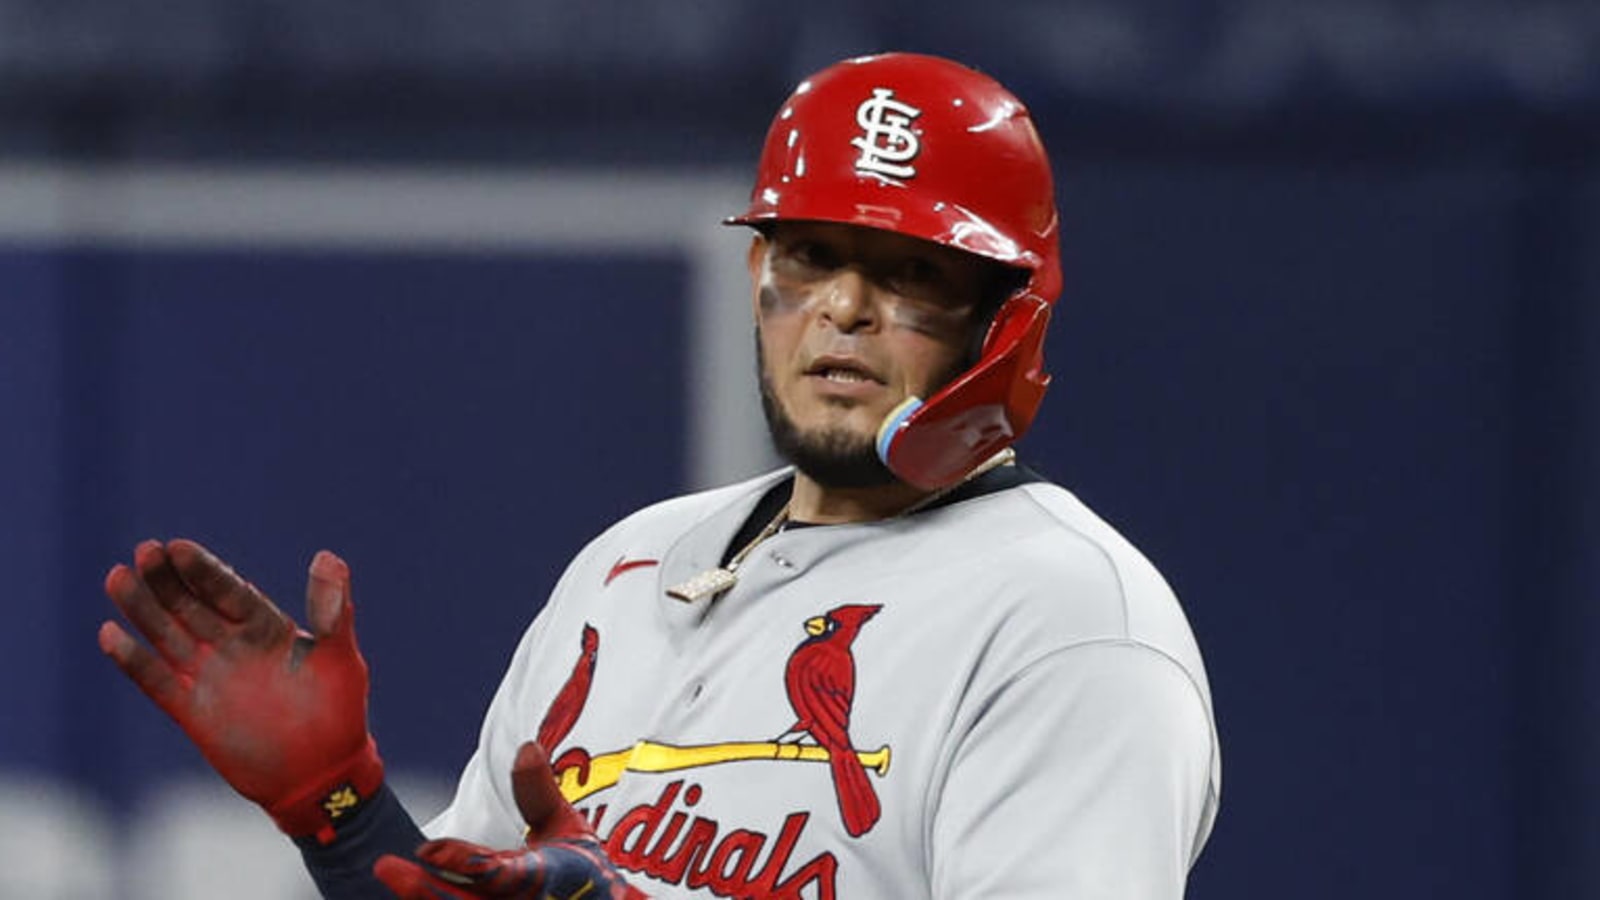 I'm happy to see them': Yadier Molina reports to Cardinals camp